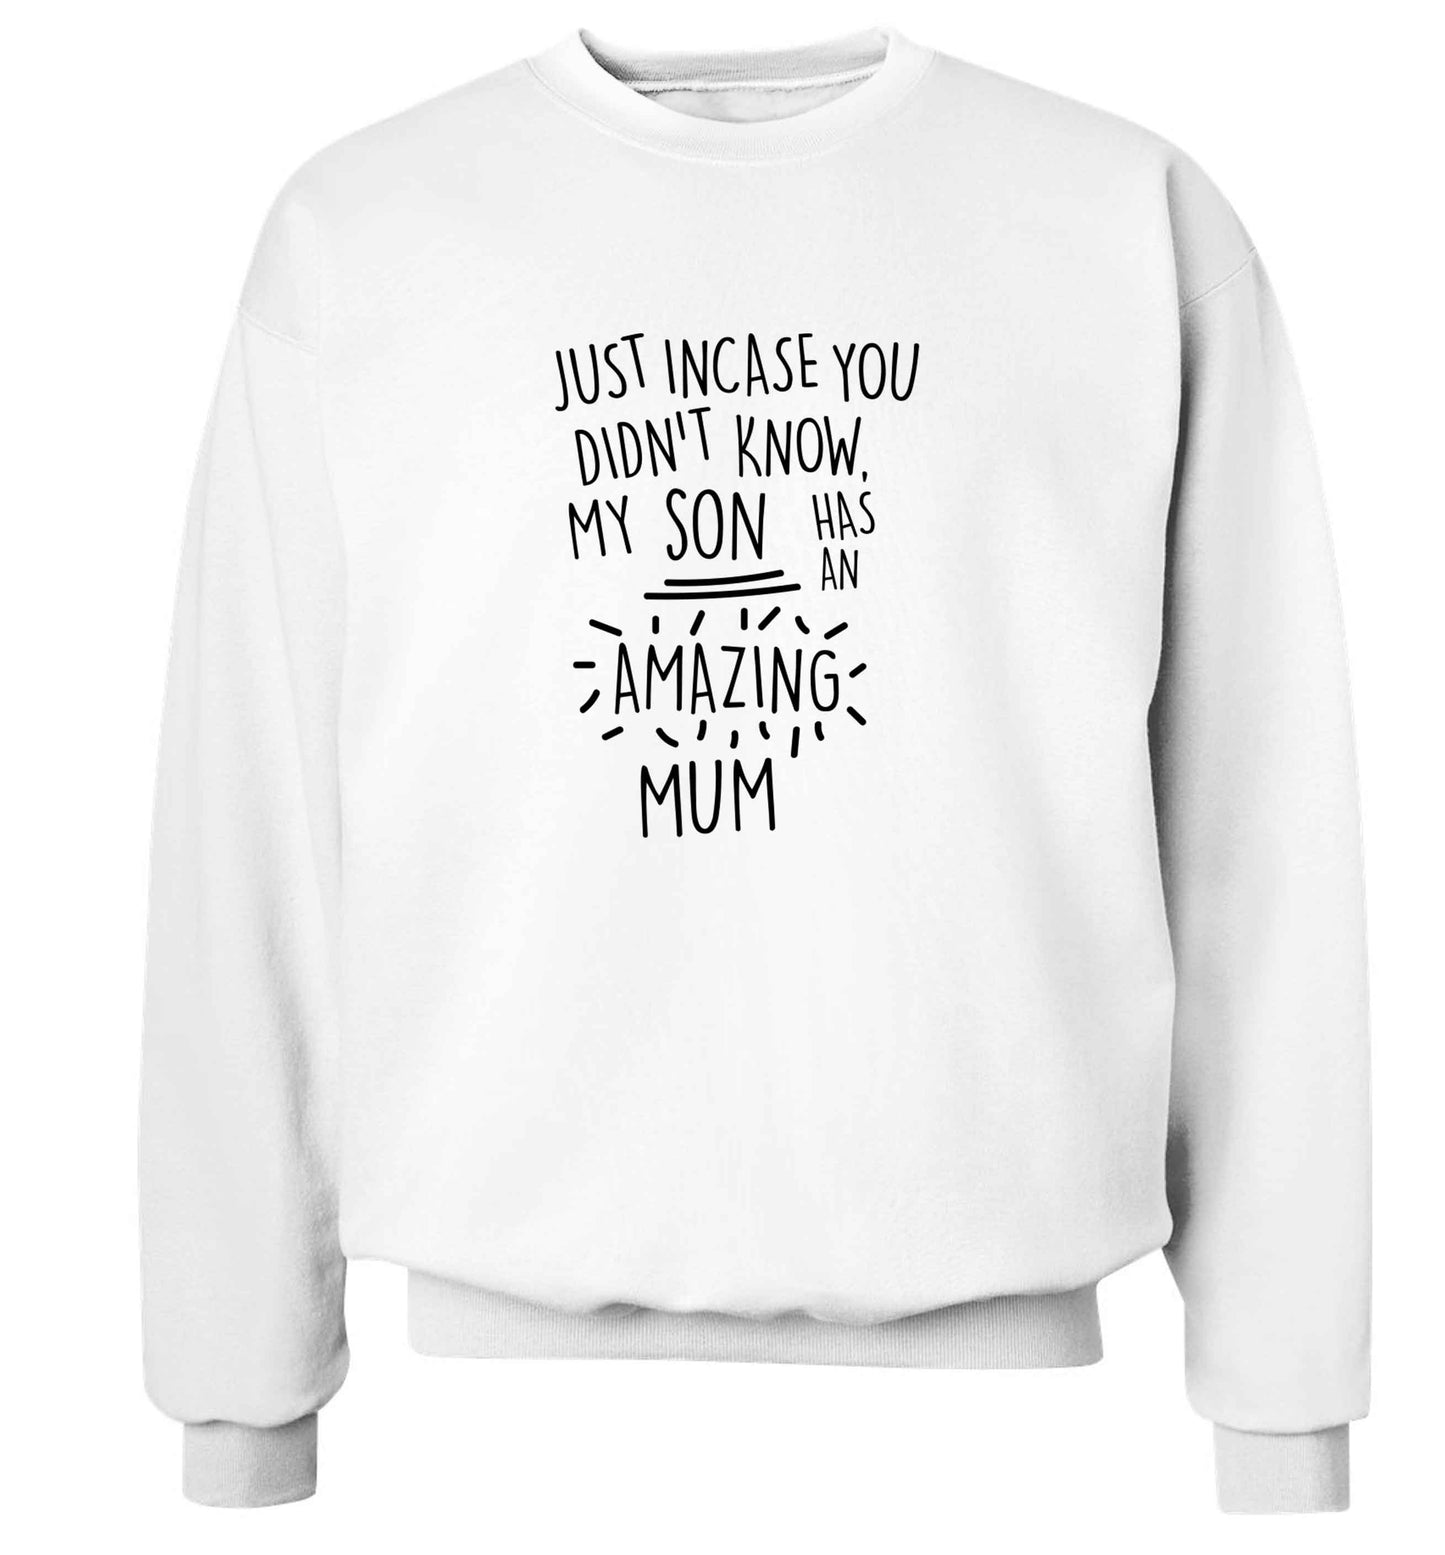 Just incase you didn't know my son has an amazing mum adult's unisex white sweater 2XL